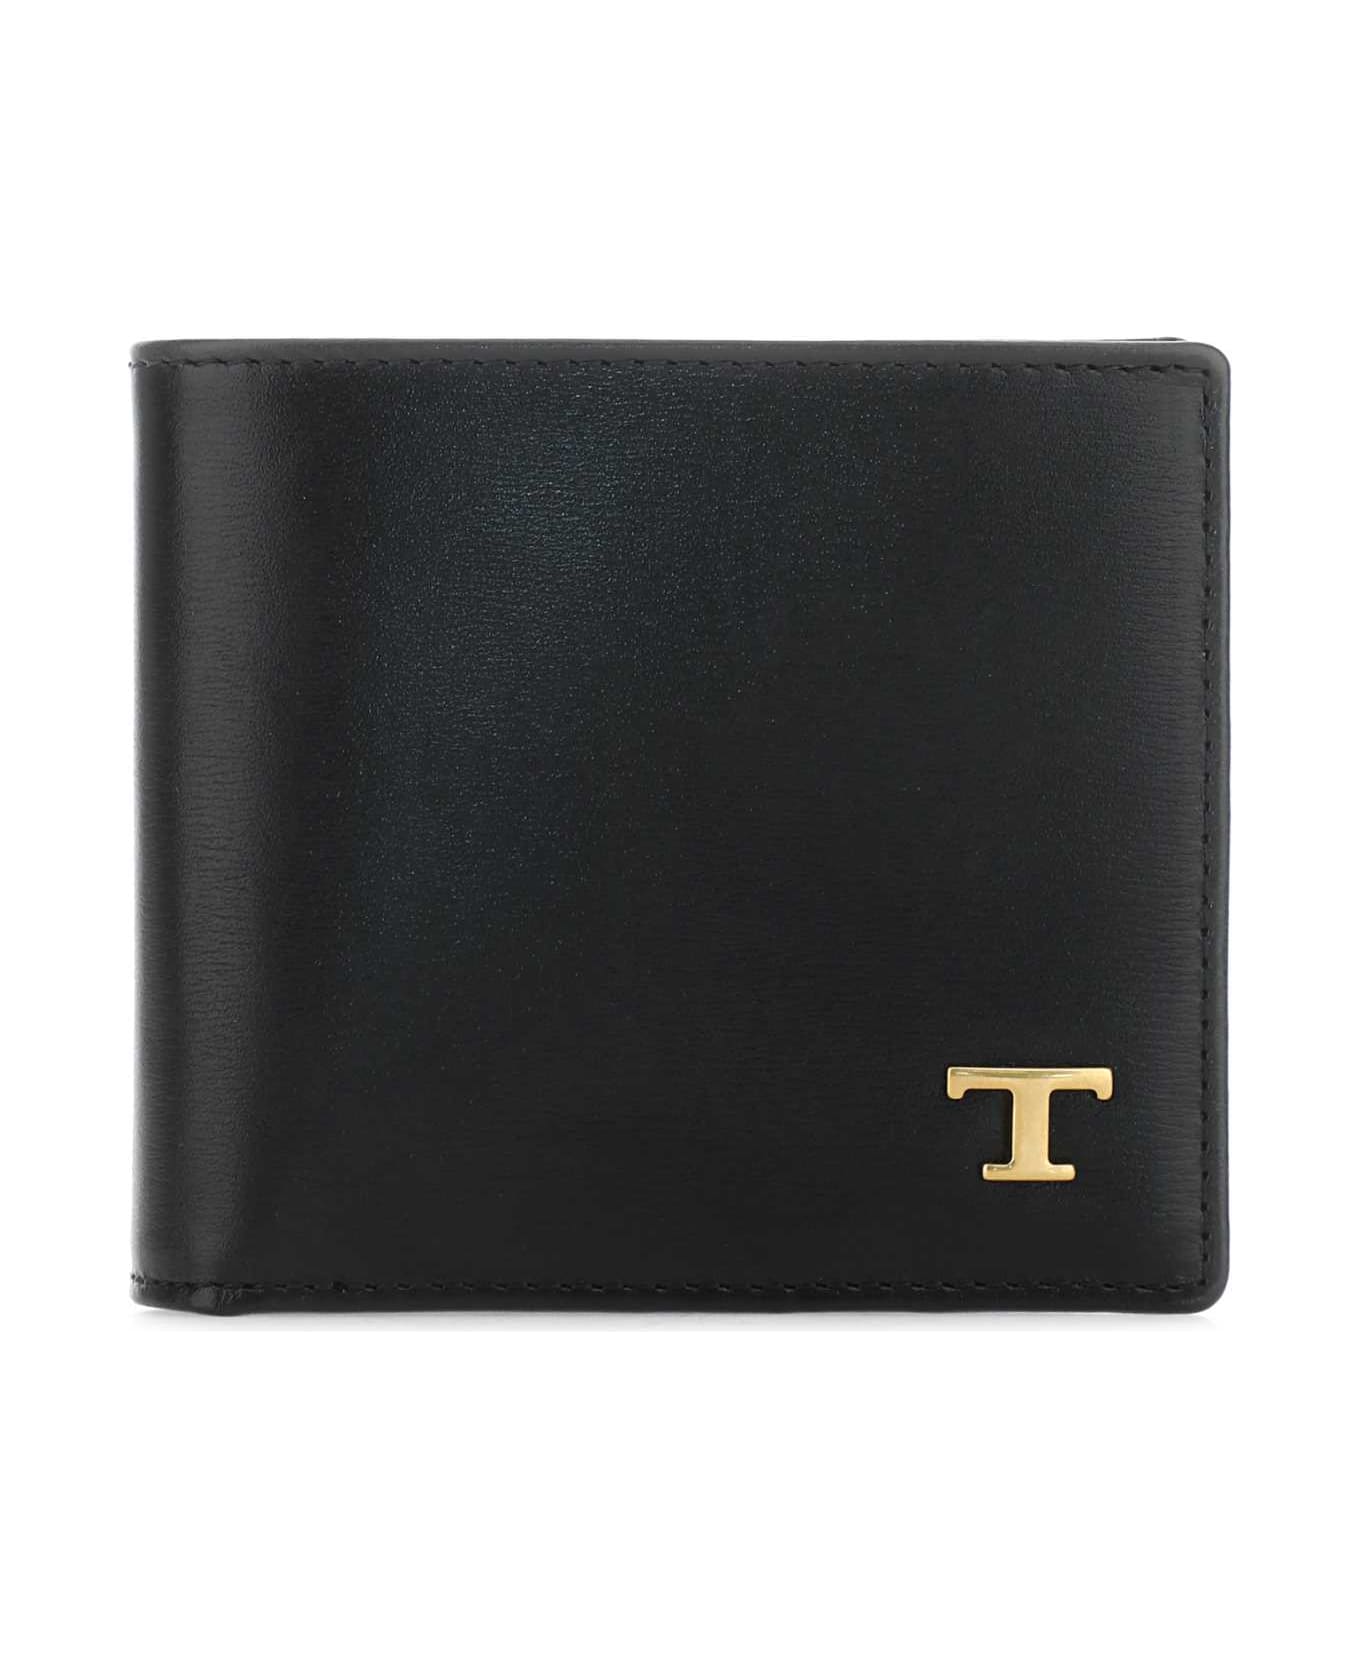 Tod's Black Leather Wallet - B999